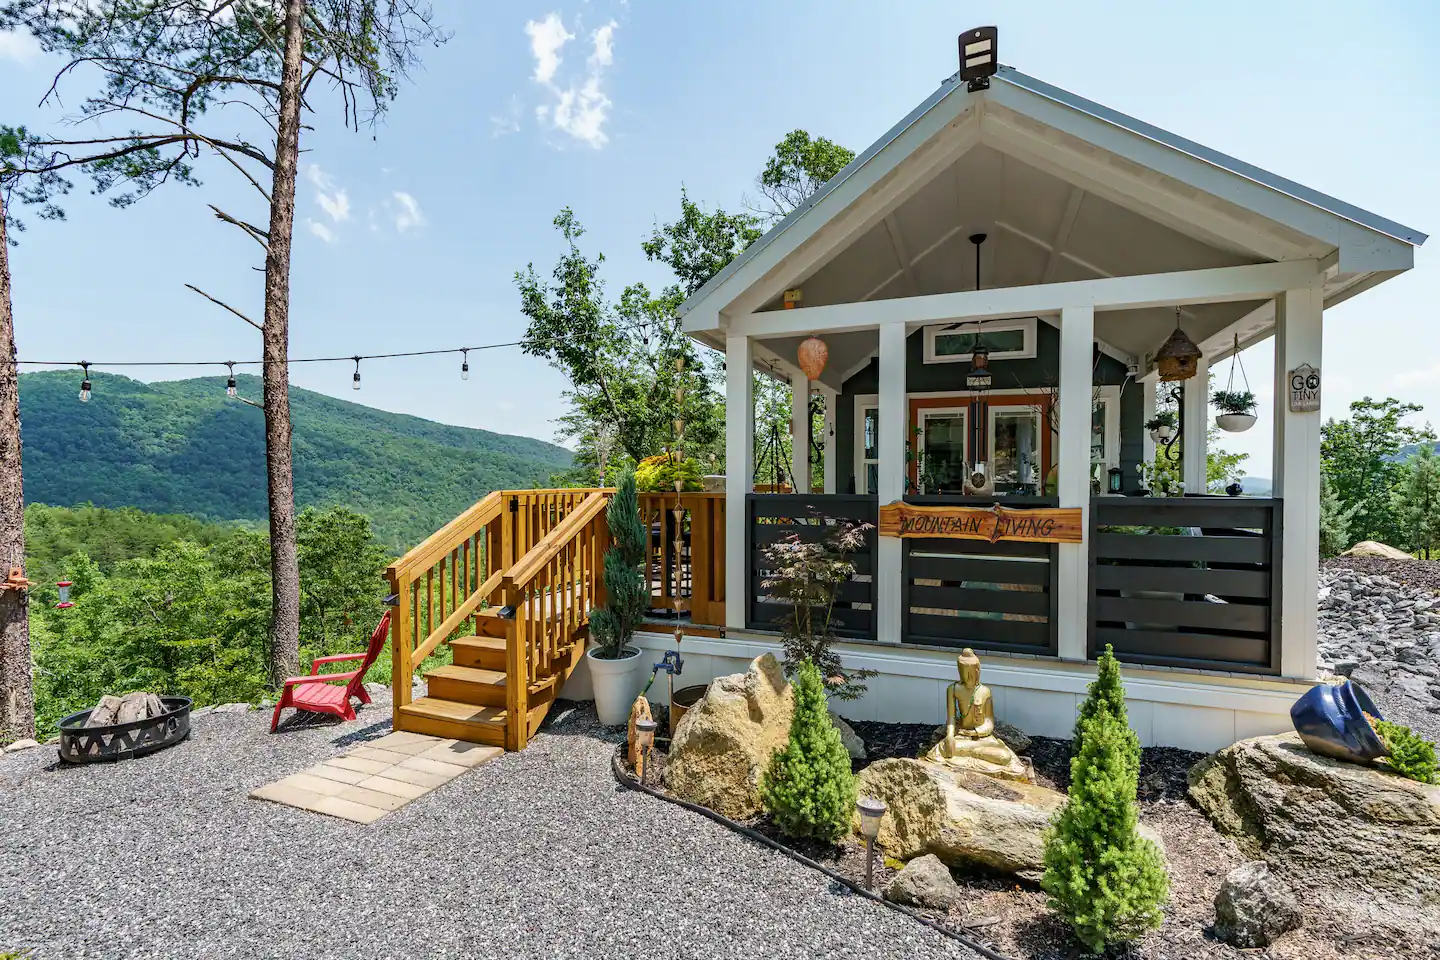 23 Charming Tiny Homes You Can Rent on Airbnb